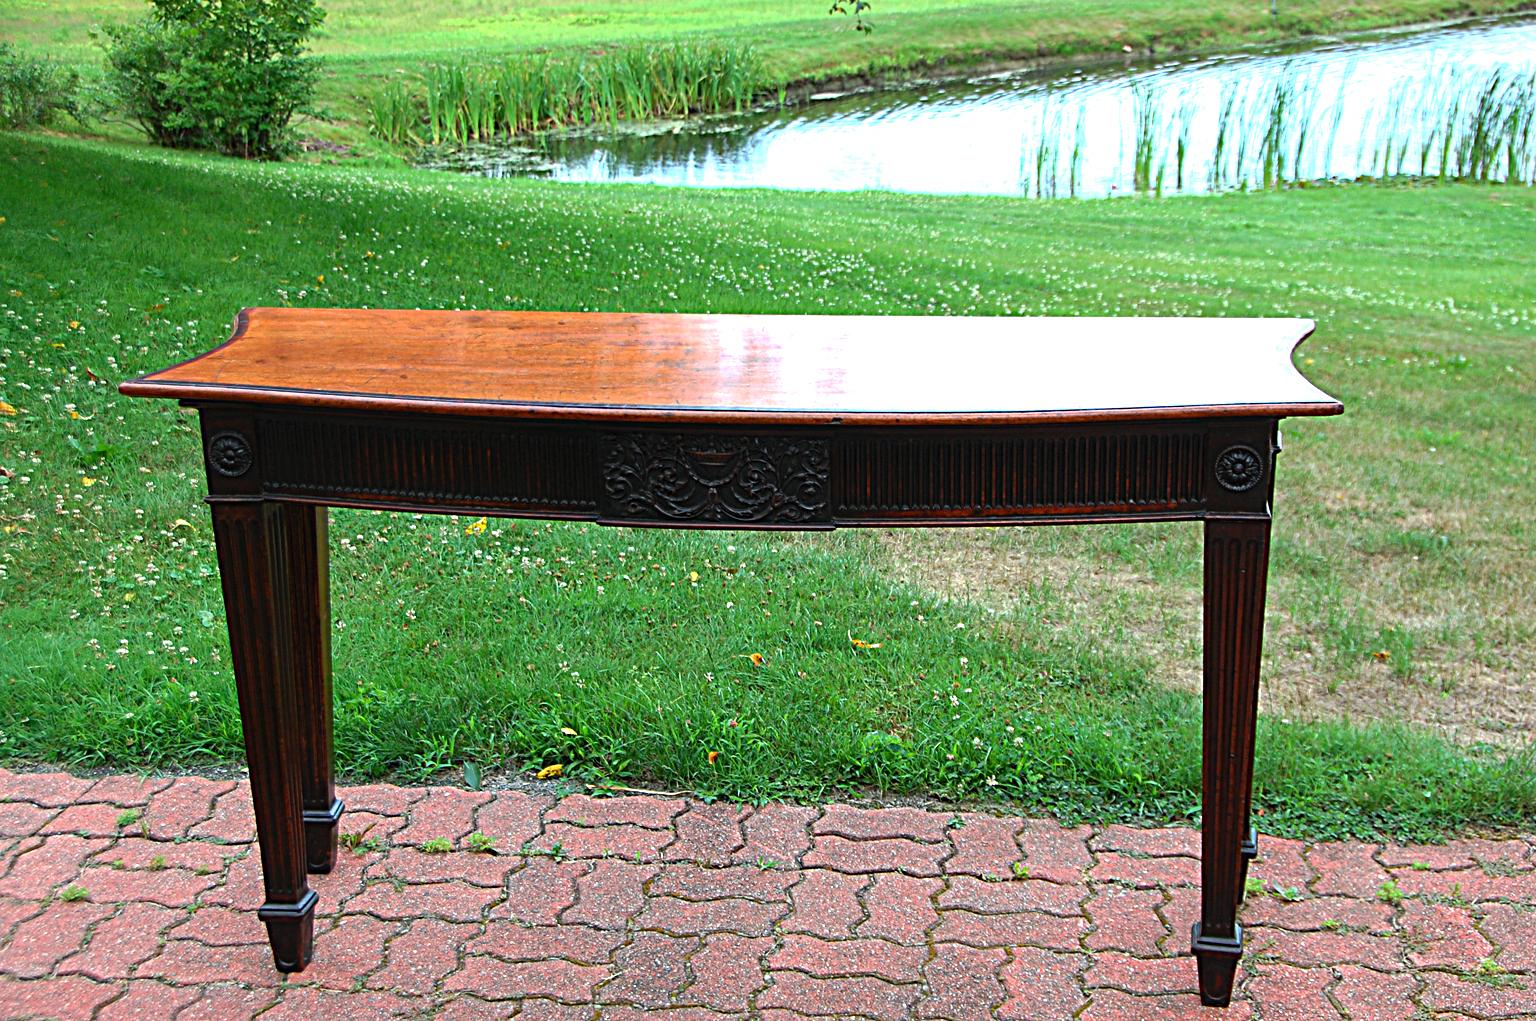 English Georgian period mahogany bowfront sideboard or hall table. The four tapered reeded legs have marlborough feet; the reeding is on three surfaces on the front legs and two surfaces on the back legs so the visual impact is quite strong. The